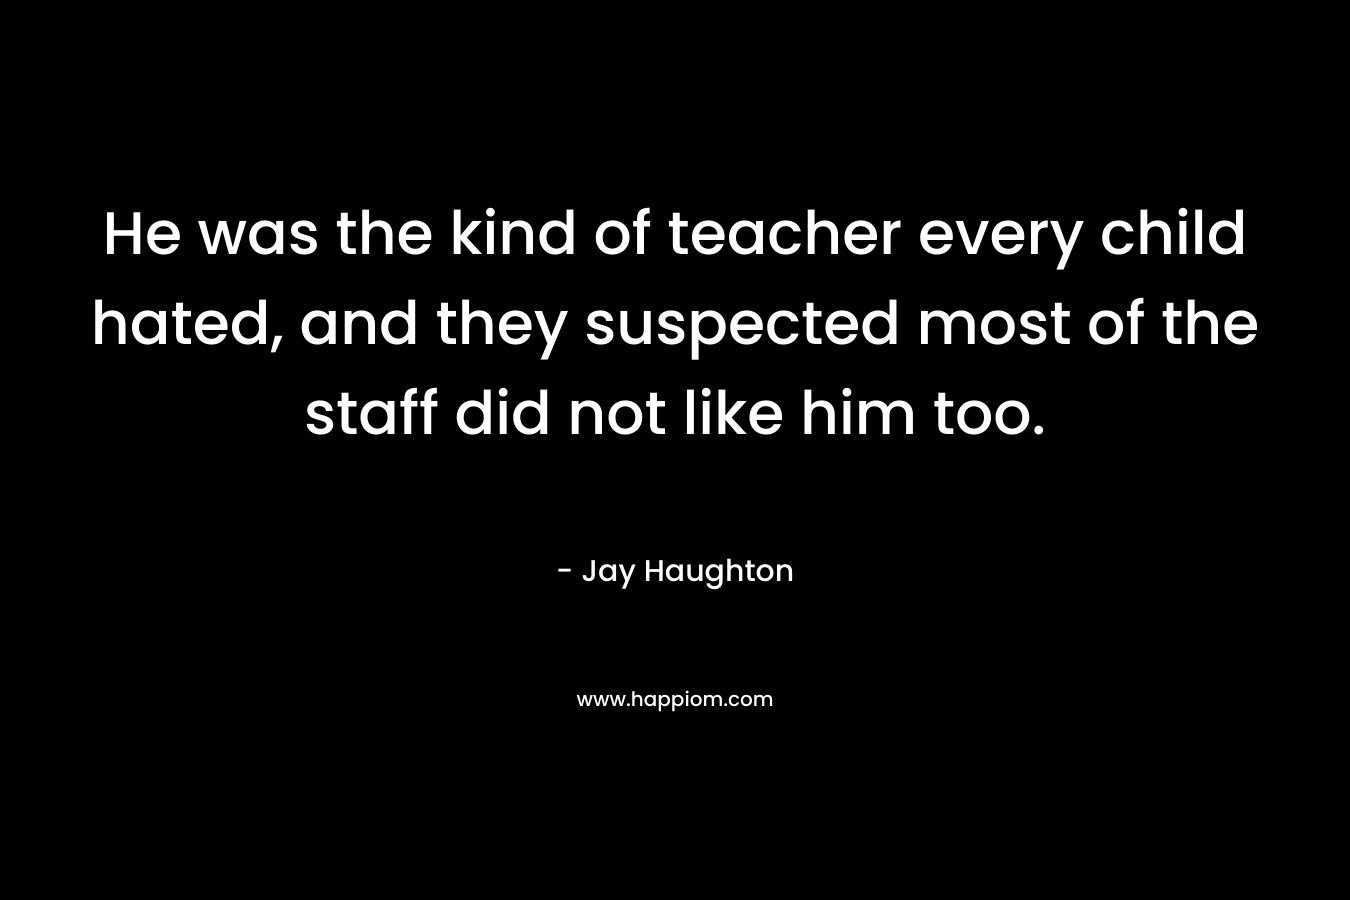 He was the kind of teacher every child hated, and they suspected most of the staff did not like him too.